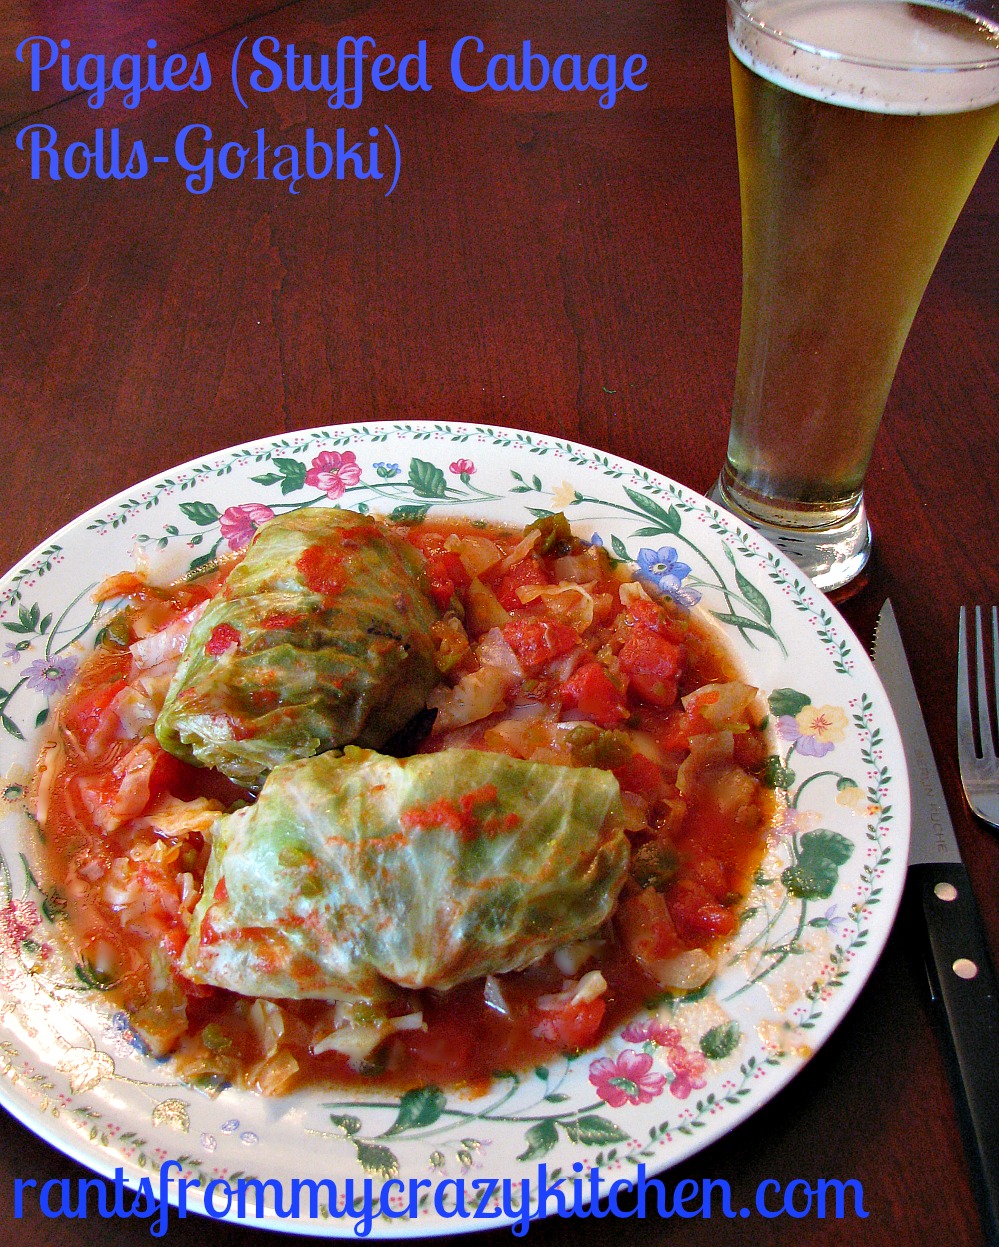 Pin 631 Share 178 Yum 43 +1 5 Tweet Stumble Email Flip SHARES 857 Stuffed Cabbage Rolls in a sweet tomato sauce with a beef and pork stuffing.